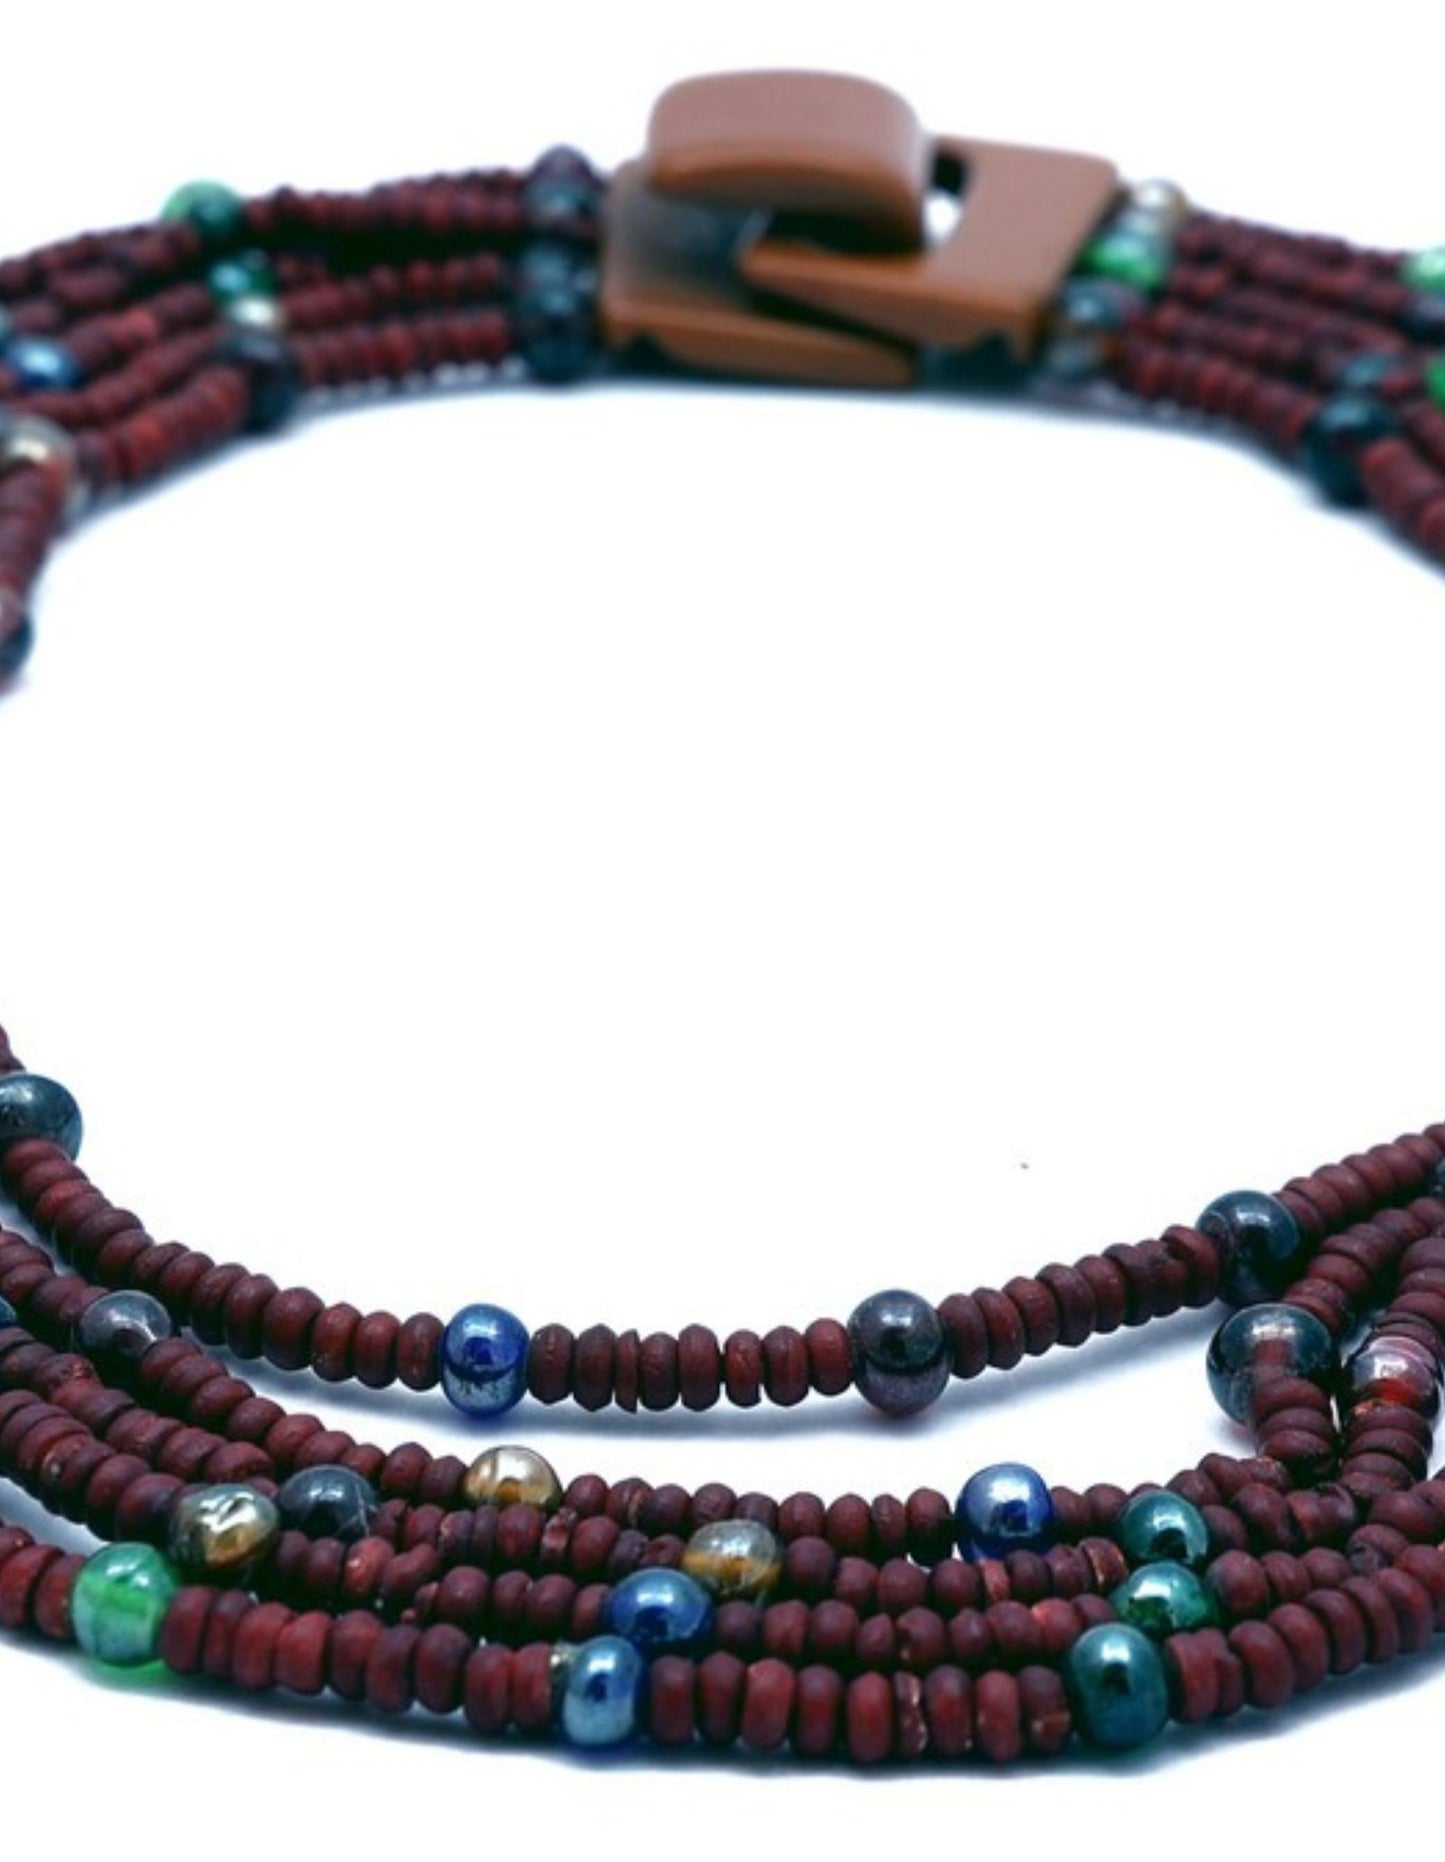 5 layer Beaded Necklace with stylish hook